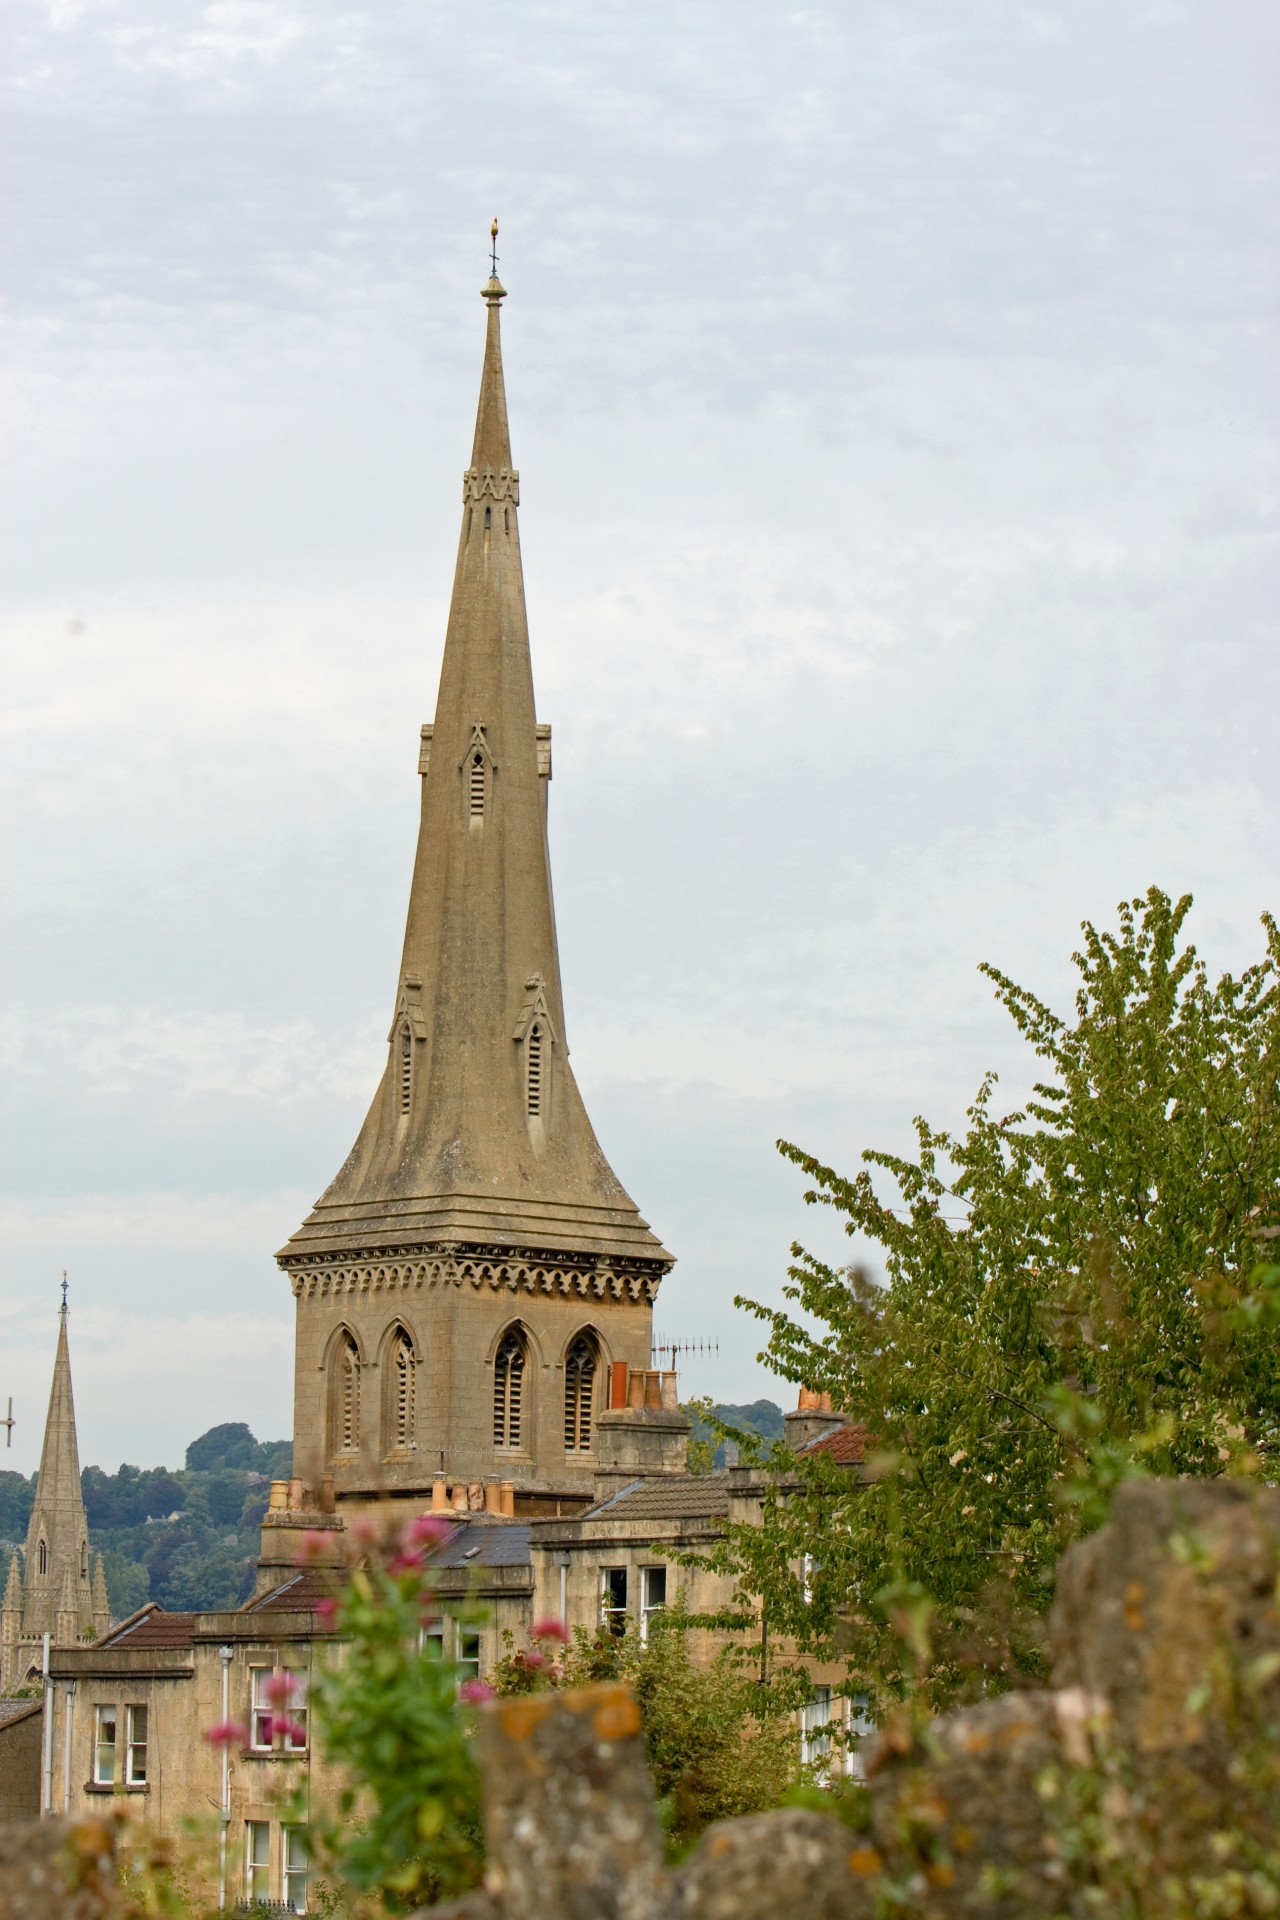 Church spire or steeple in the city of bath, england